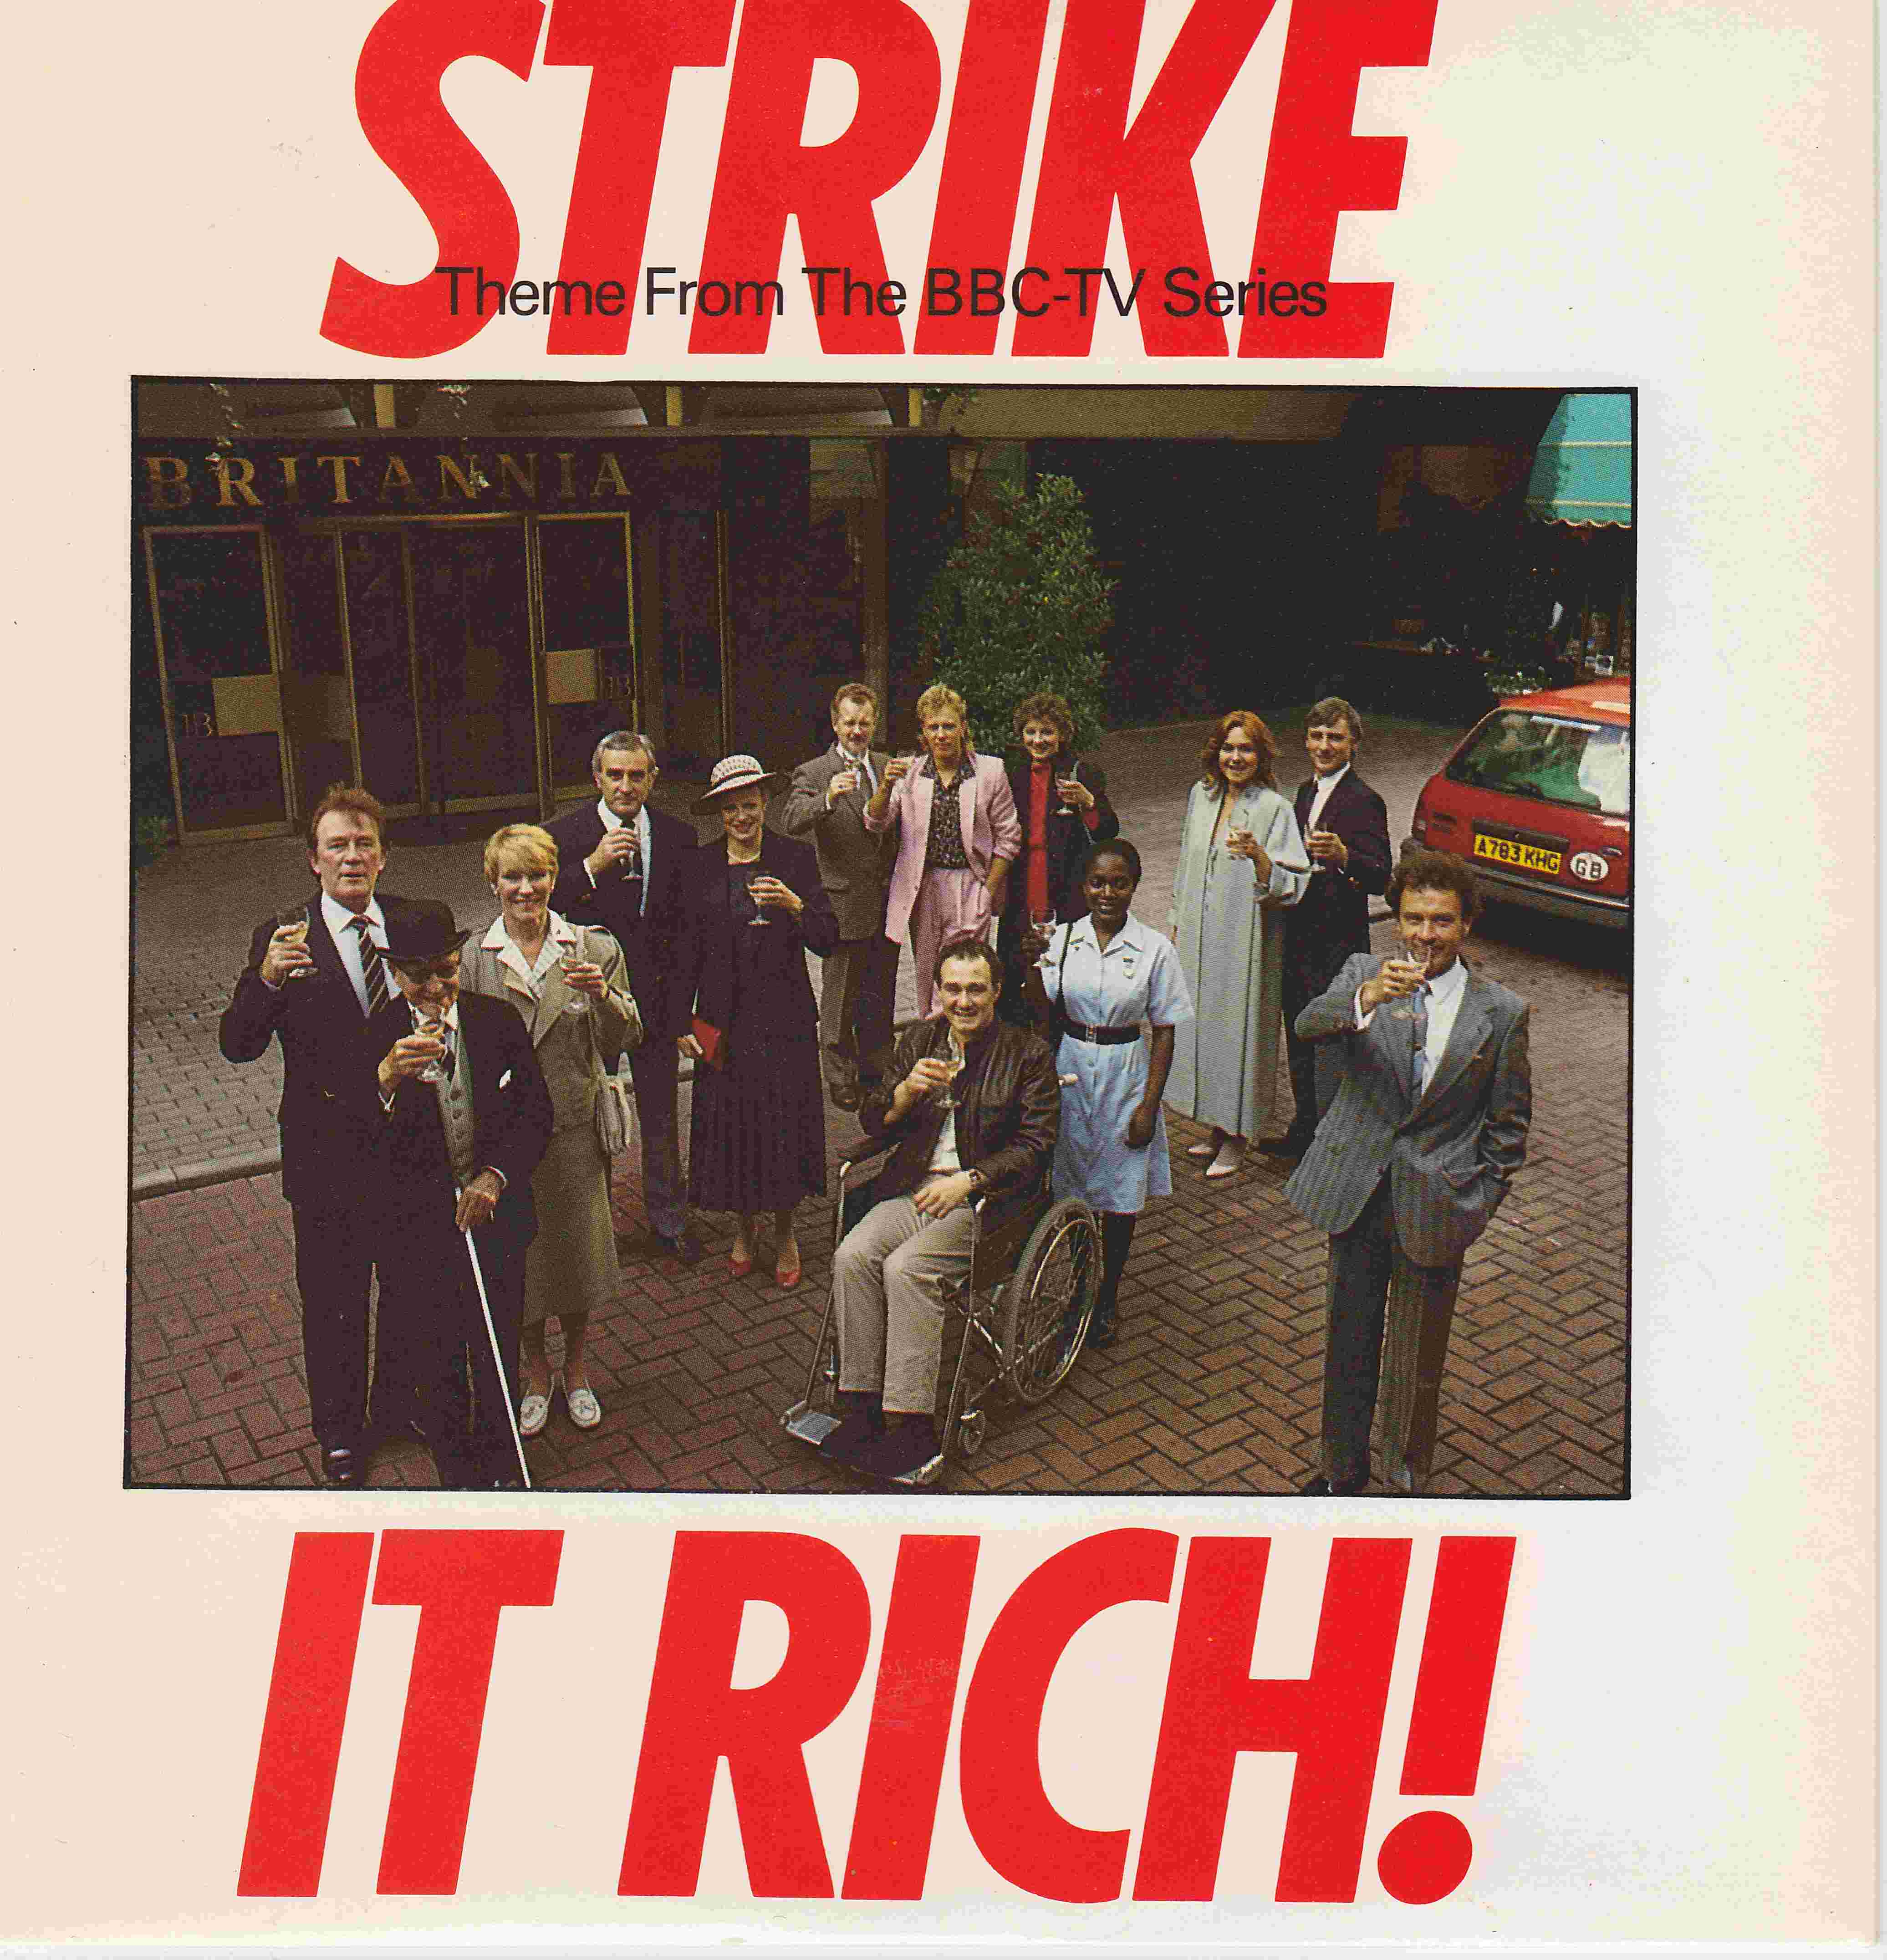 Picture of RESL 177 Strike it rich by artist Mills and McKenna / Francois Trichot from the BBC records and Tapes library